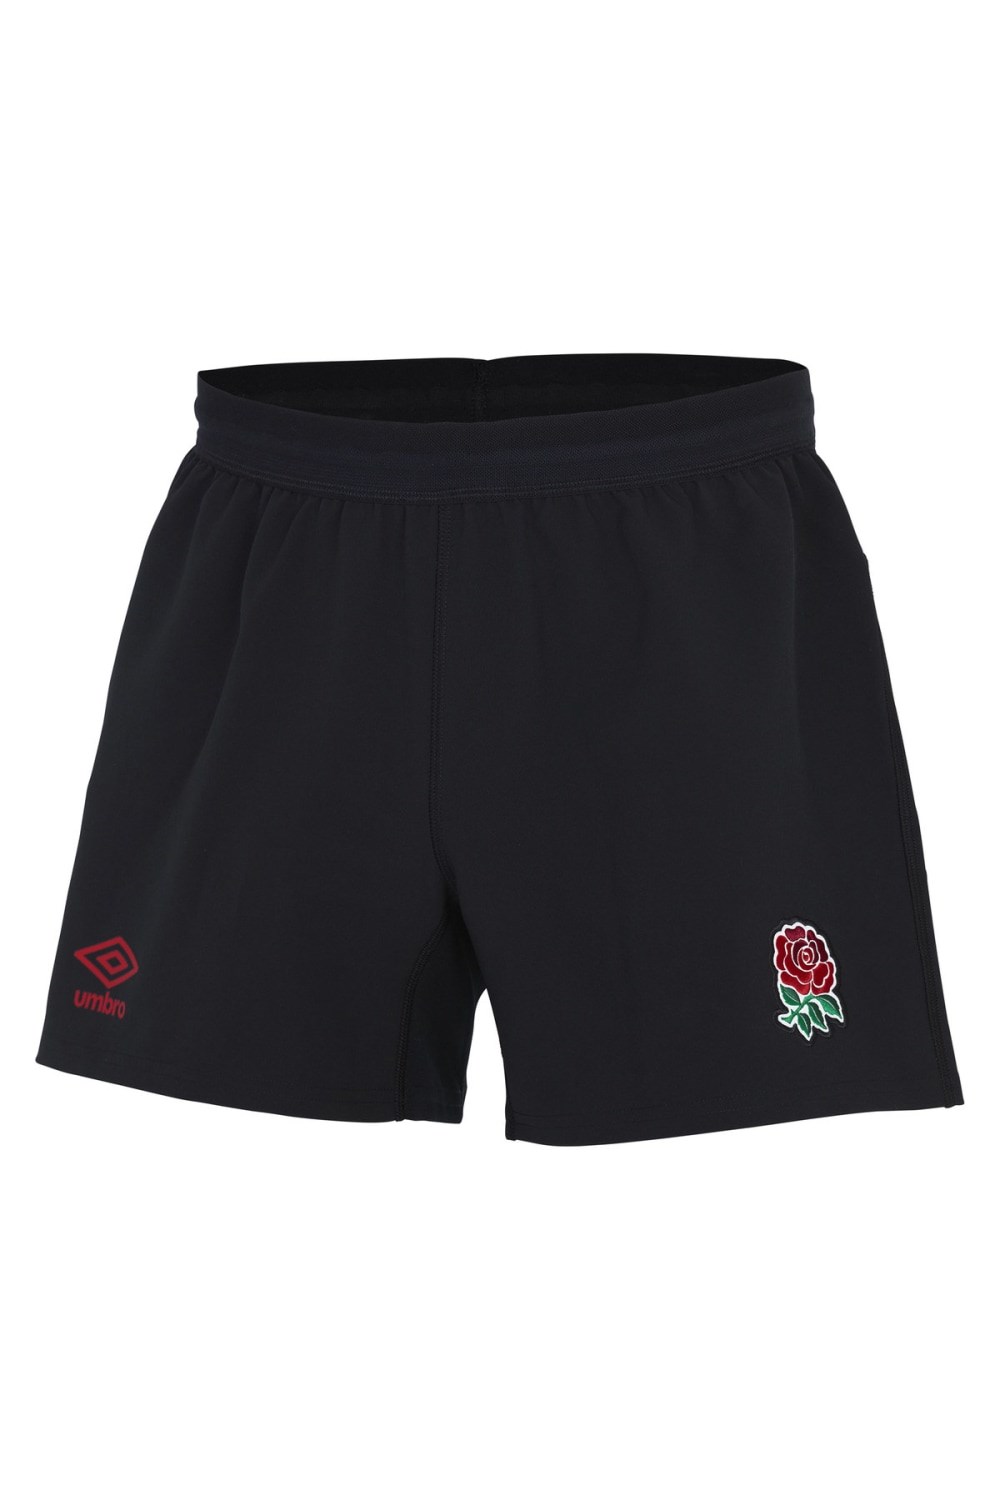 England Rugby 22/23 Mens Alternate Pro Shorts -